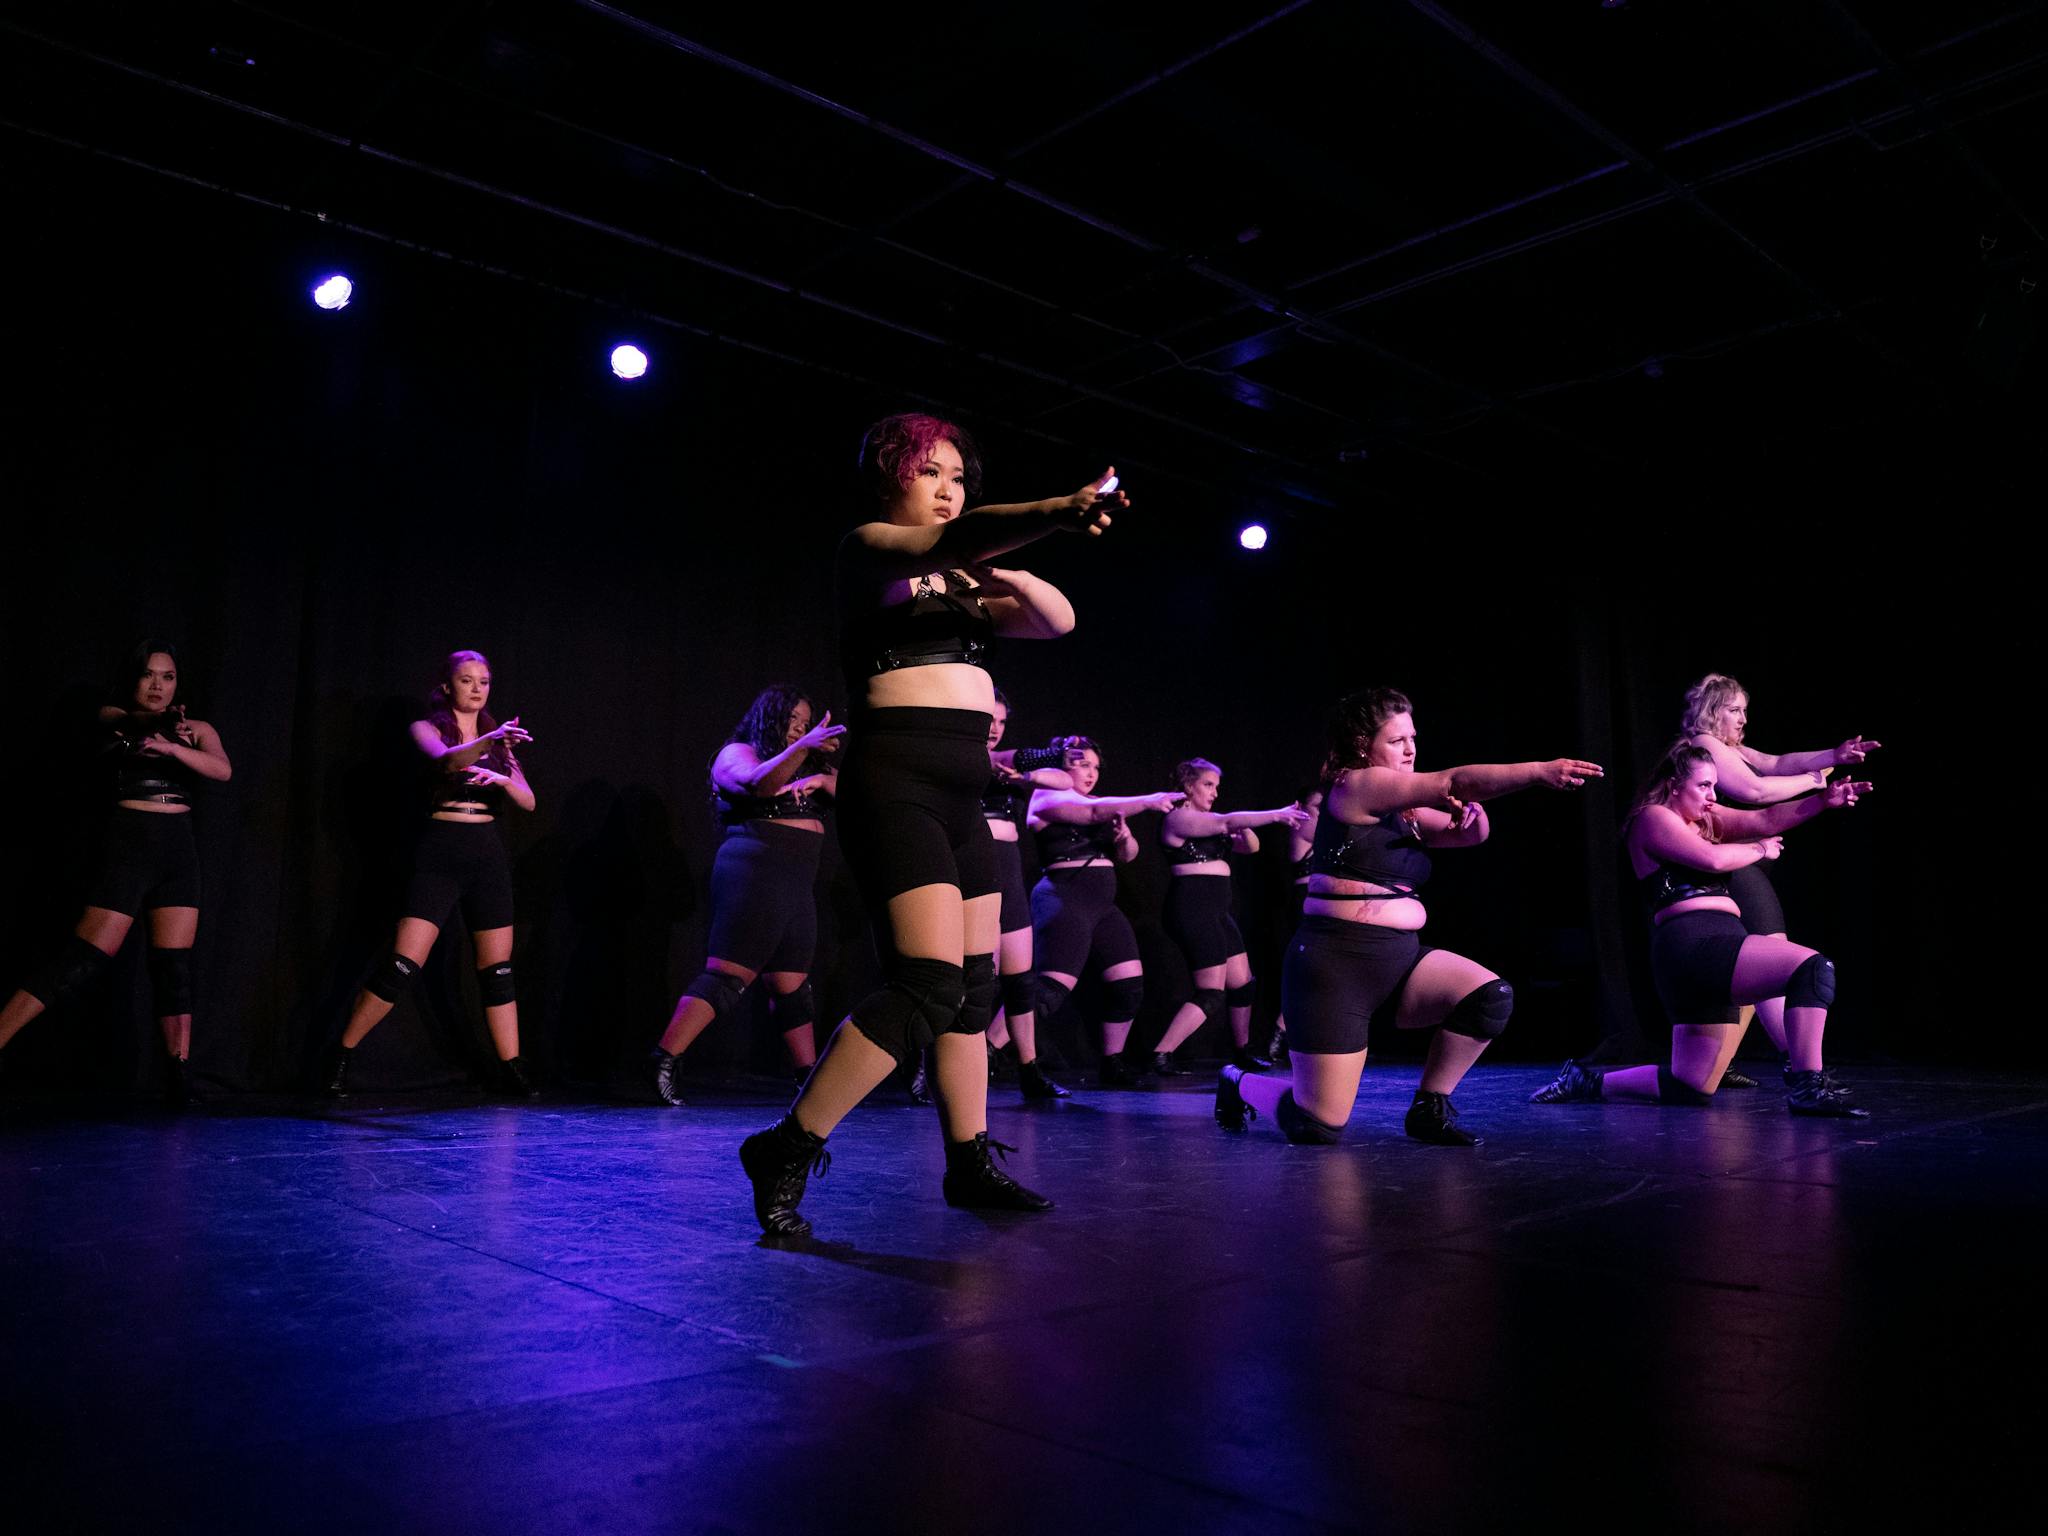 Performers in black clothes on stage in formation holding strong poses